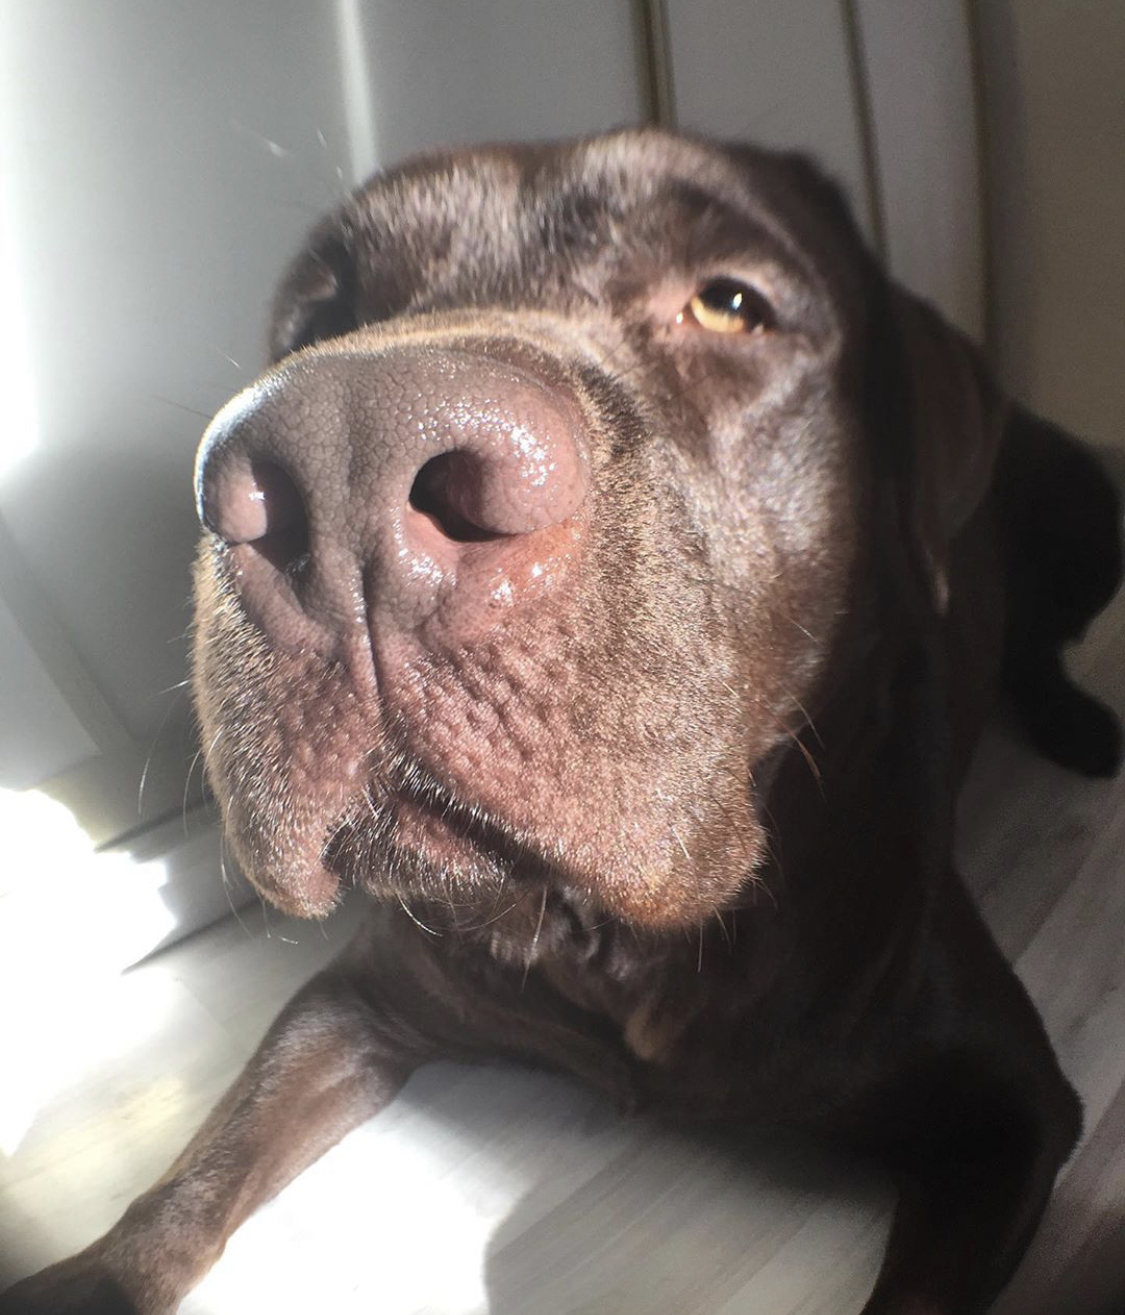 A Labrador retriever lying on the floor with sunlight on its face